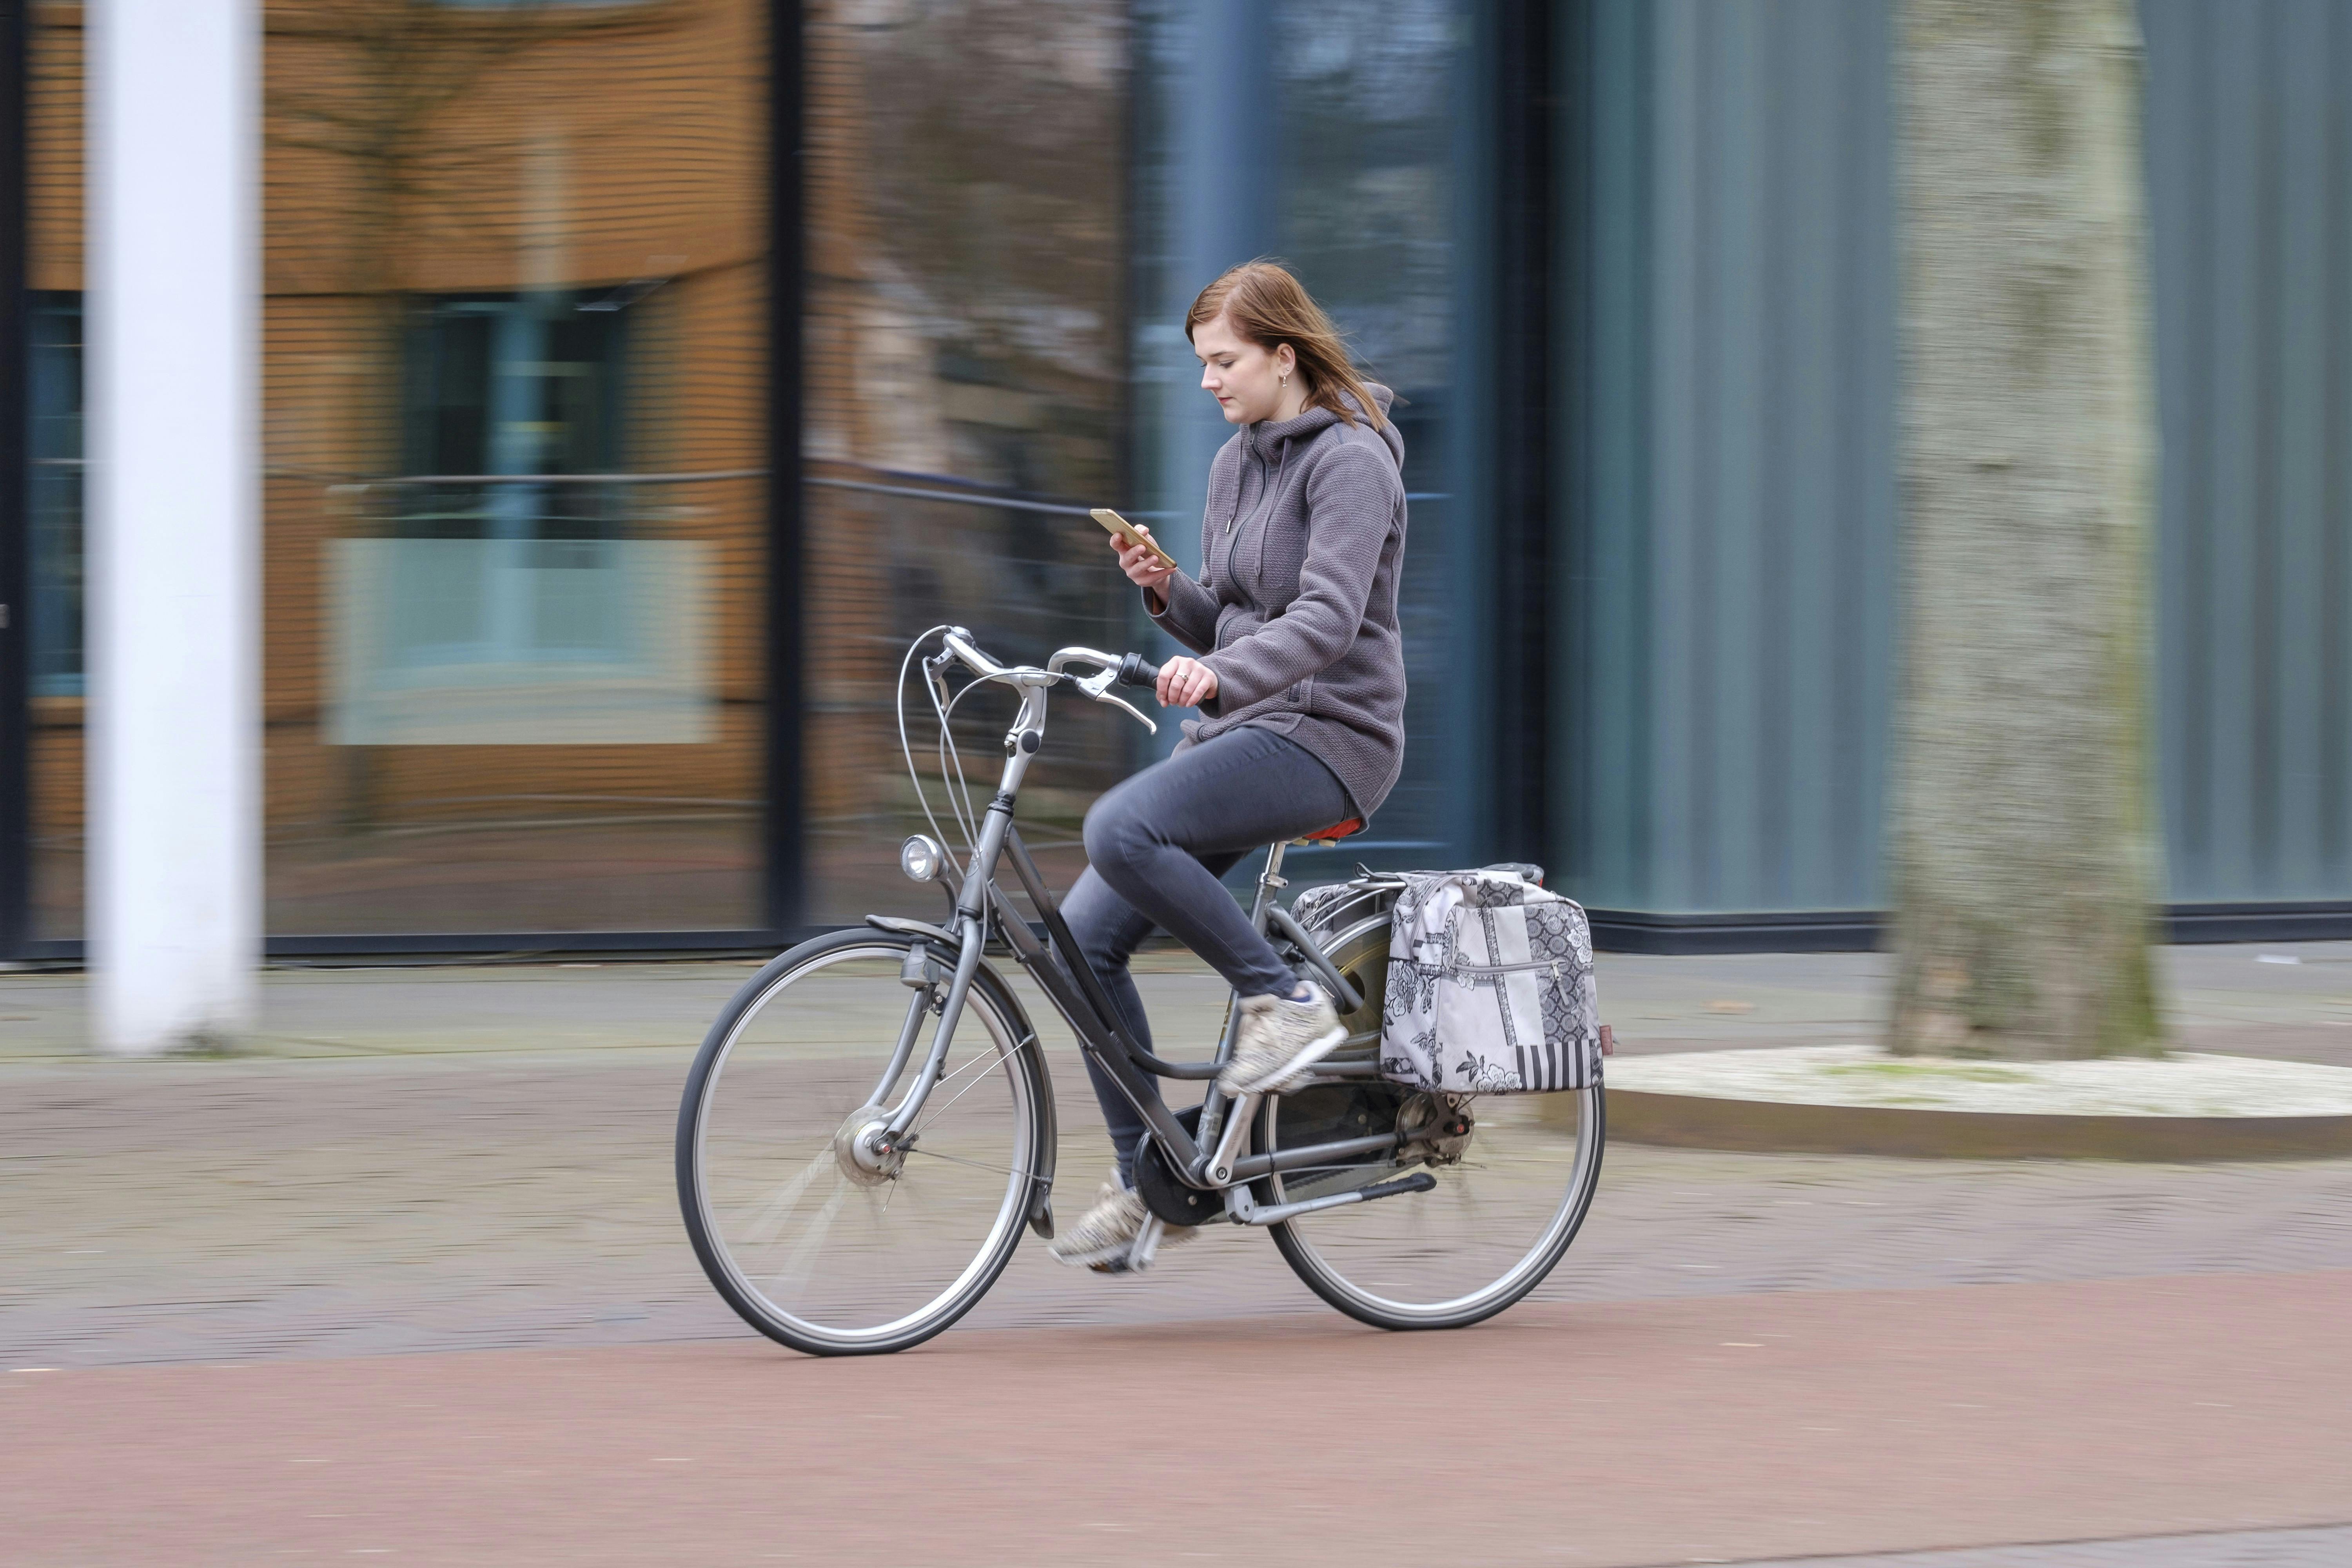 Young woman getting distracted by his smartphone while riding his bicycle around the city